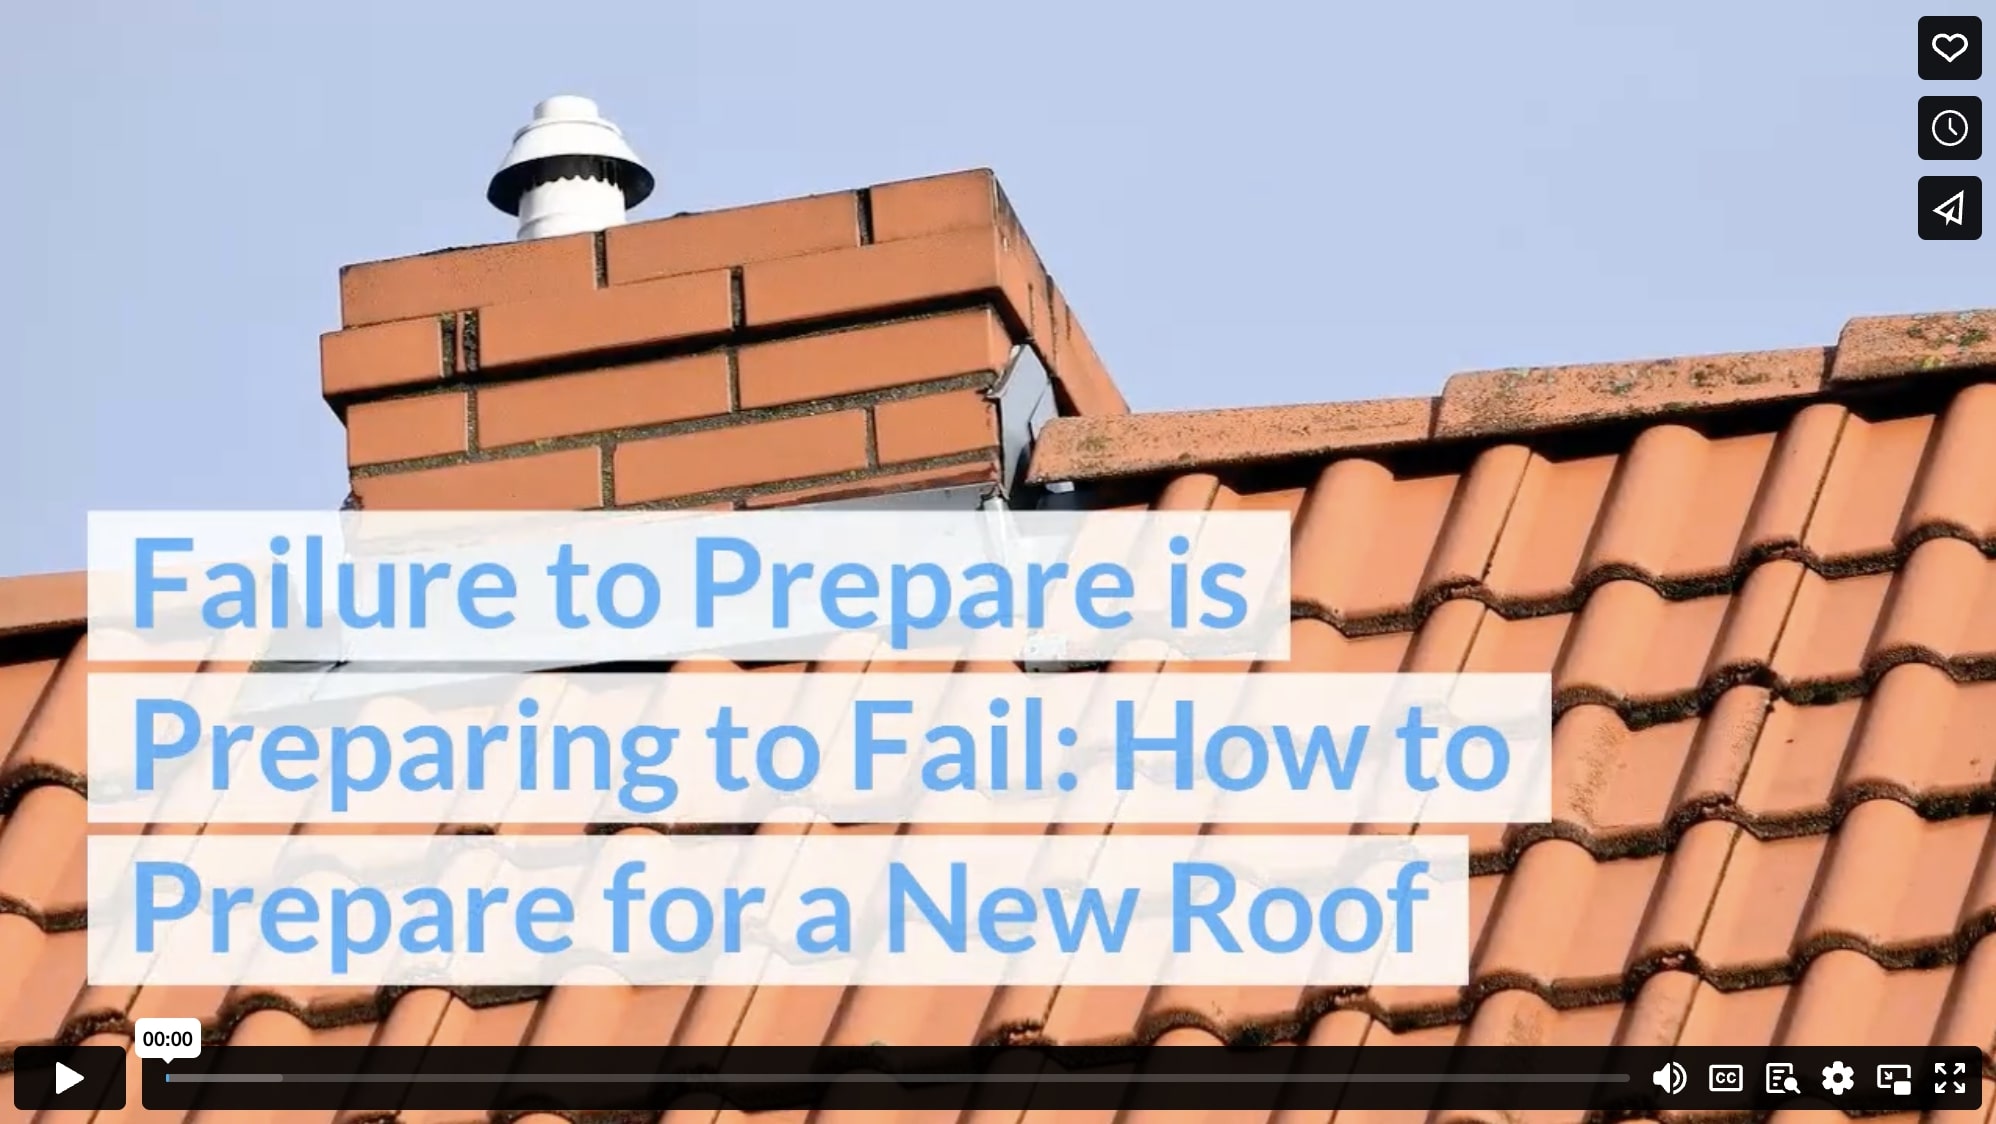 Failure to Prepare is Preparing to Fail: How to Prepare for a New Roof